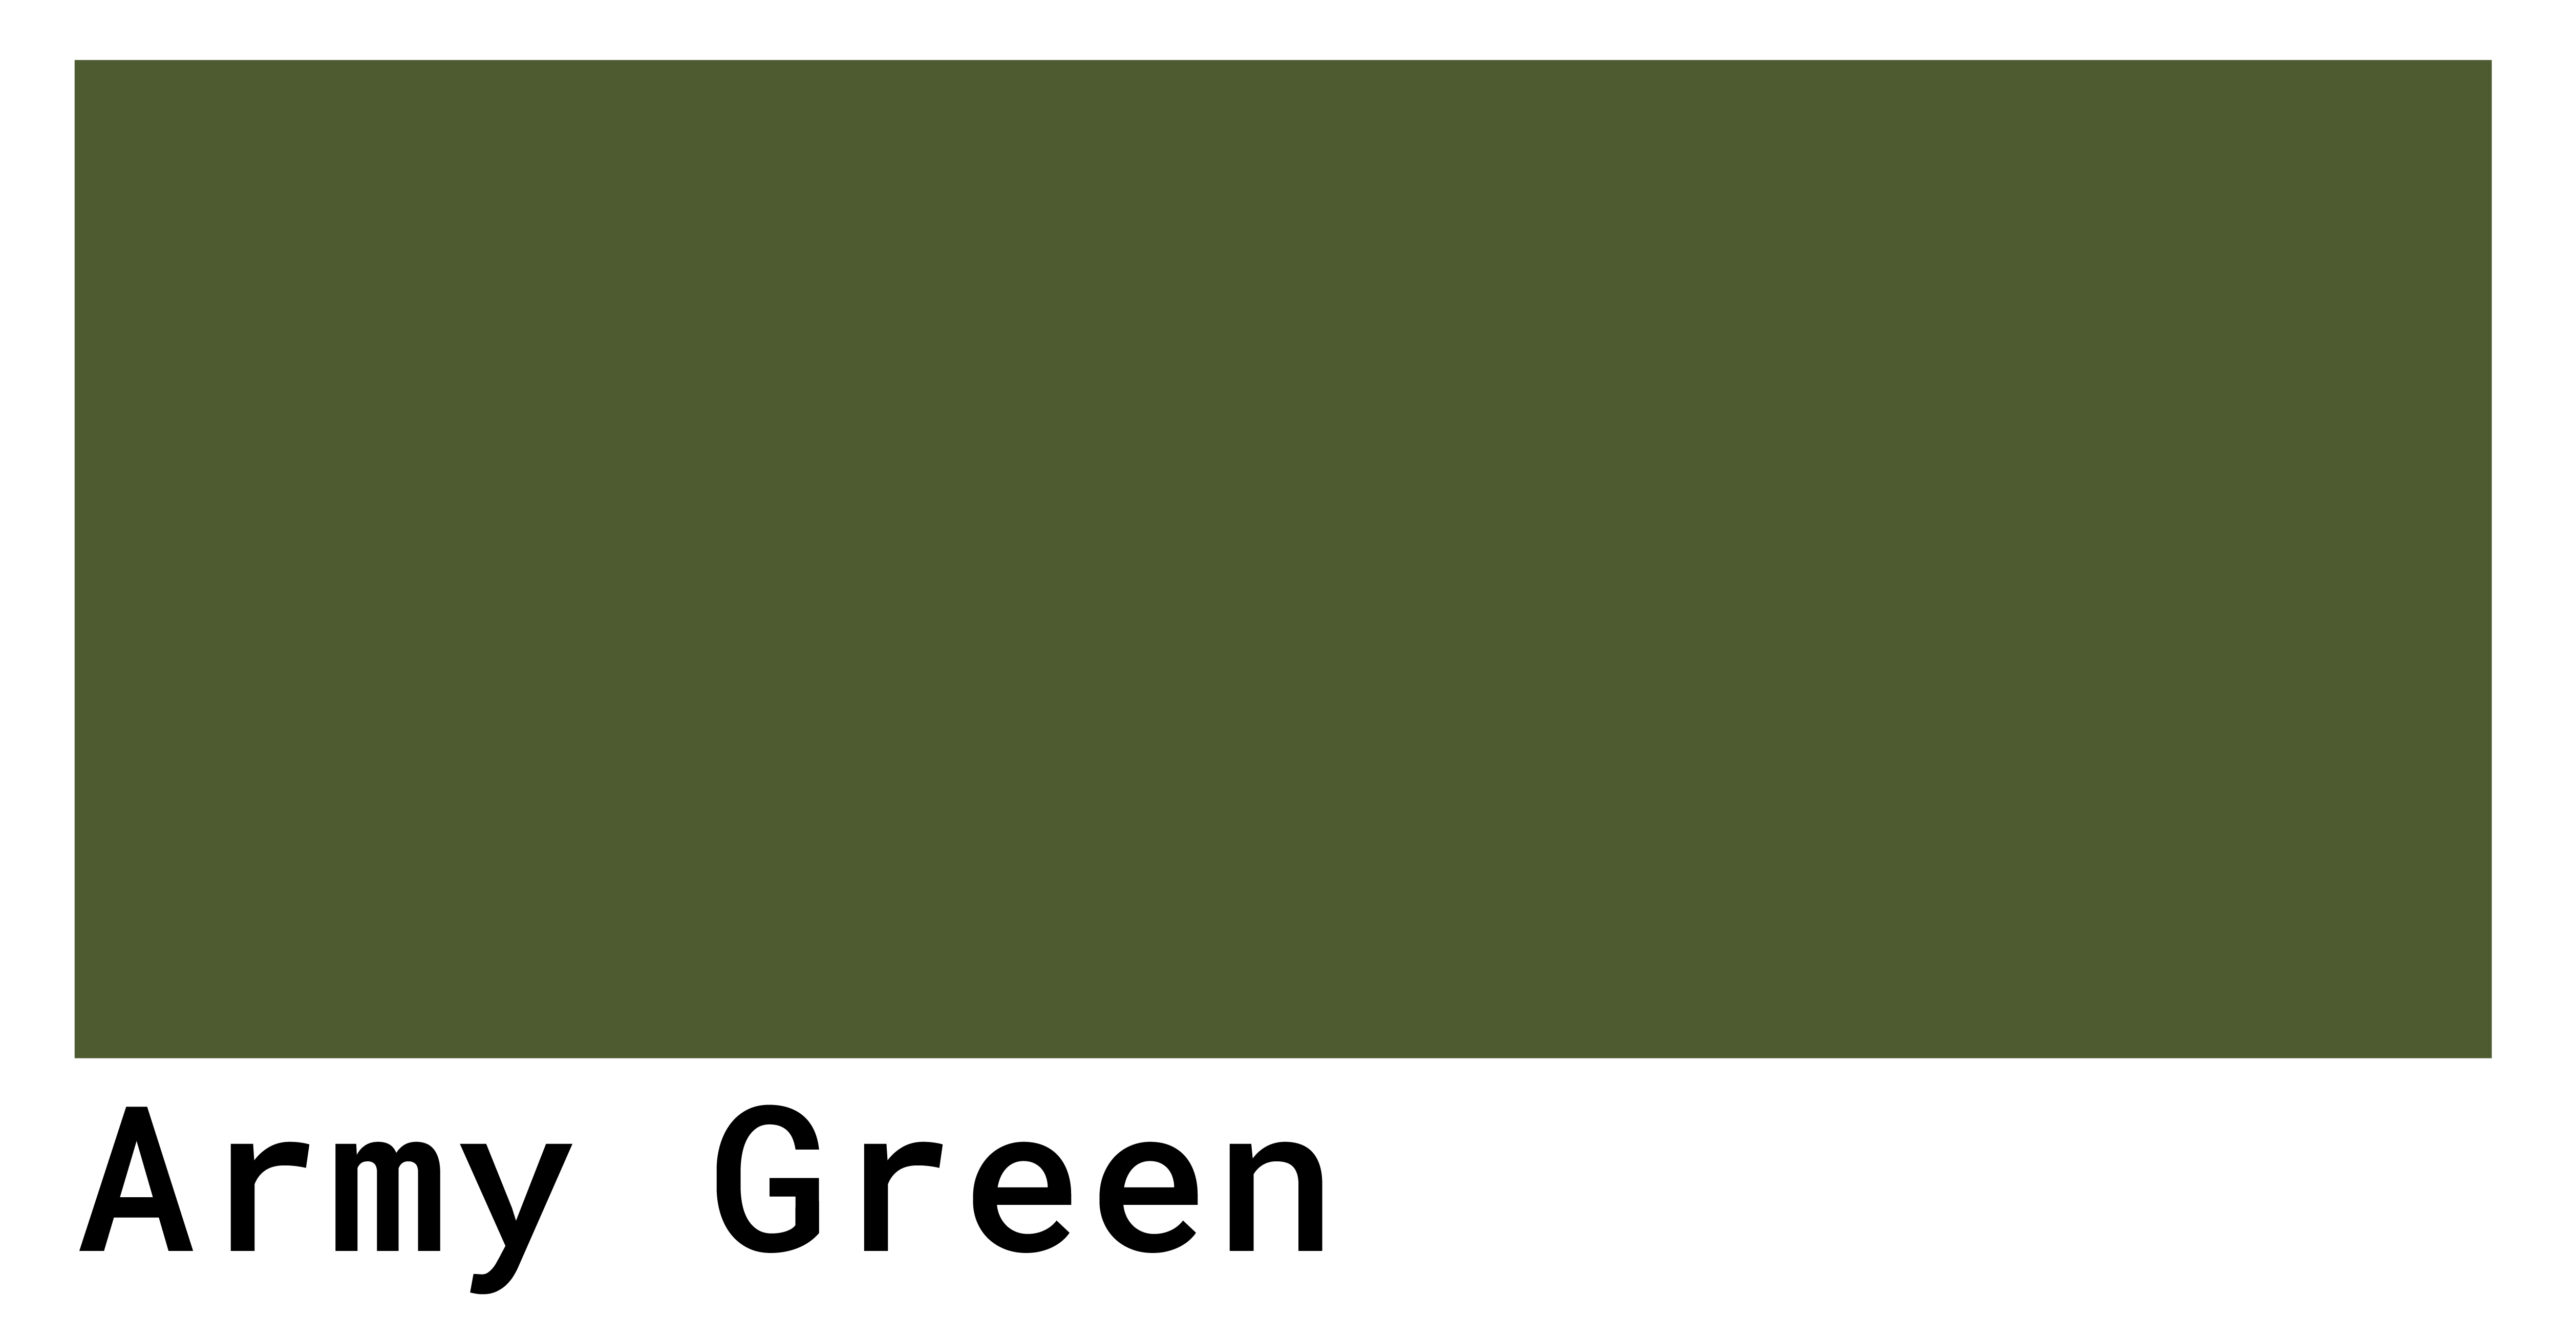 army green color swatch scaled